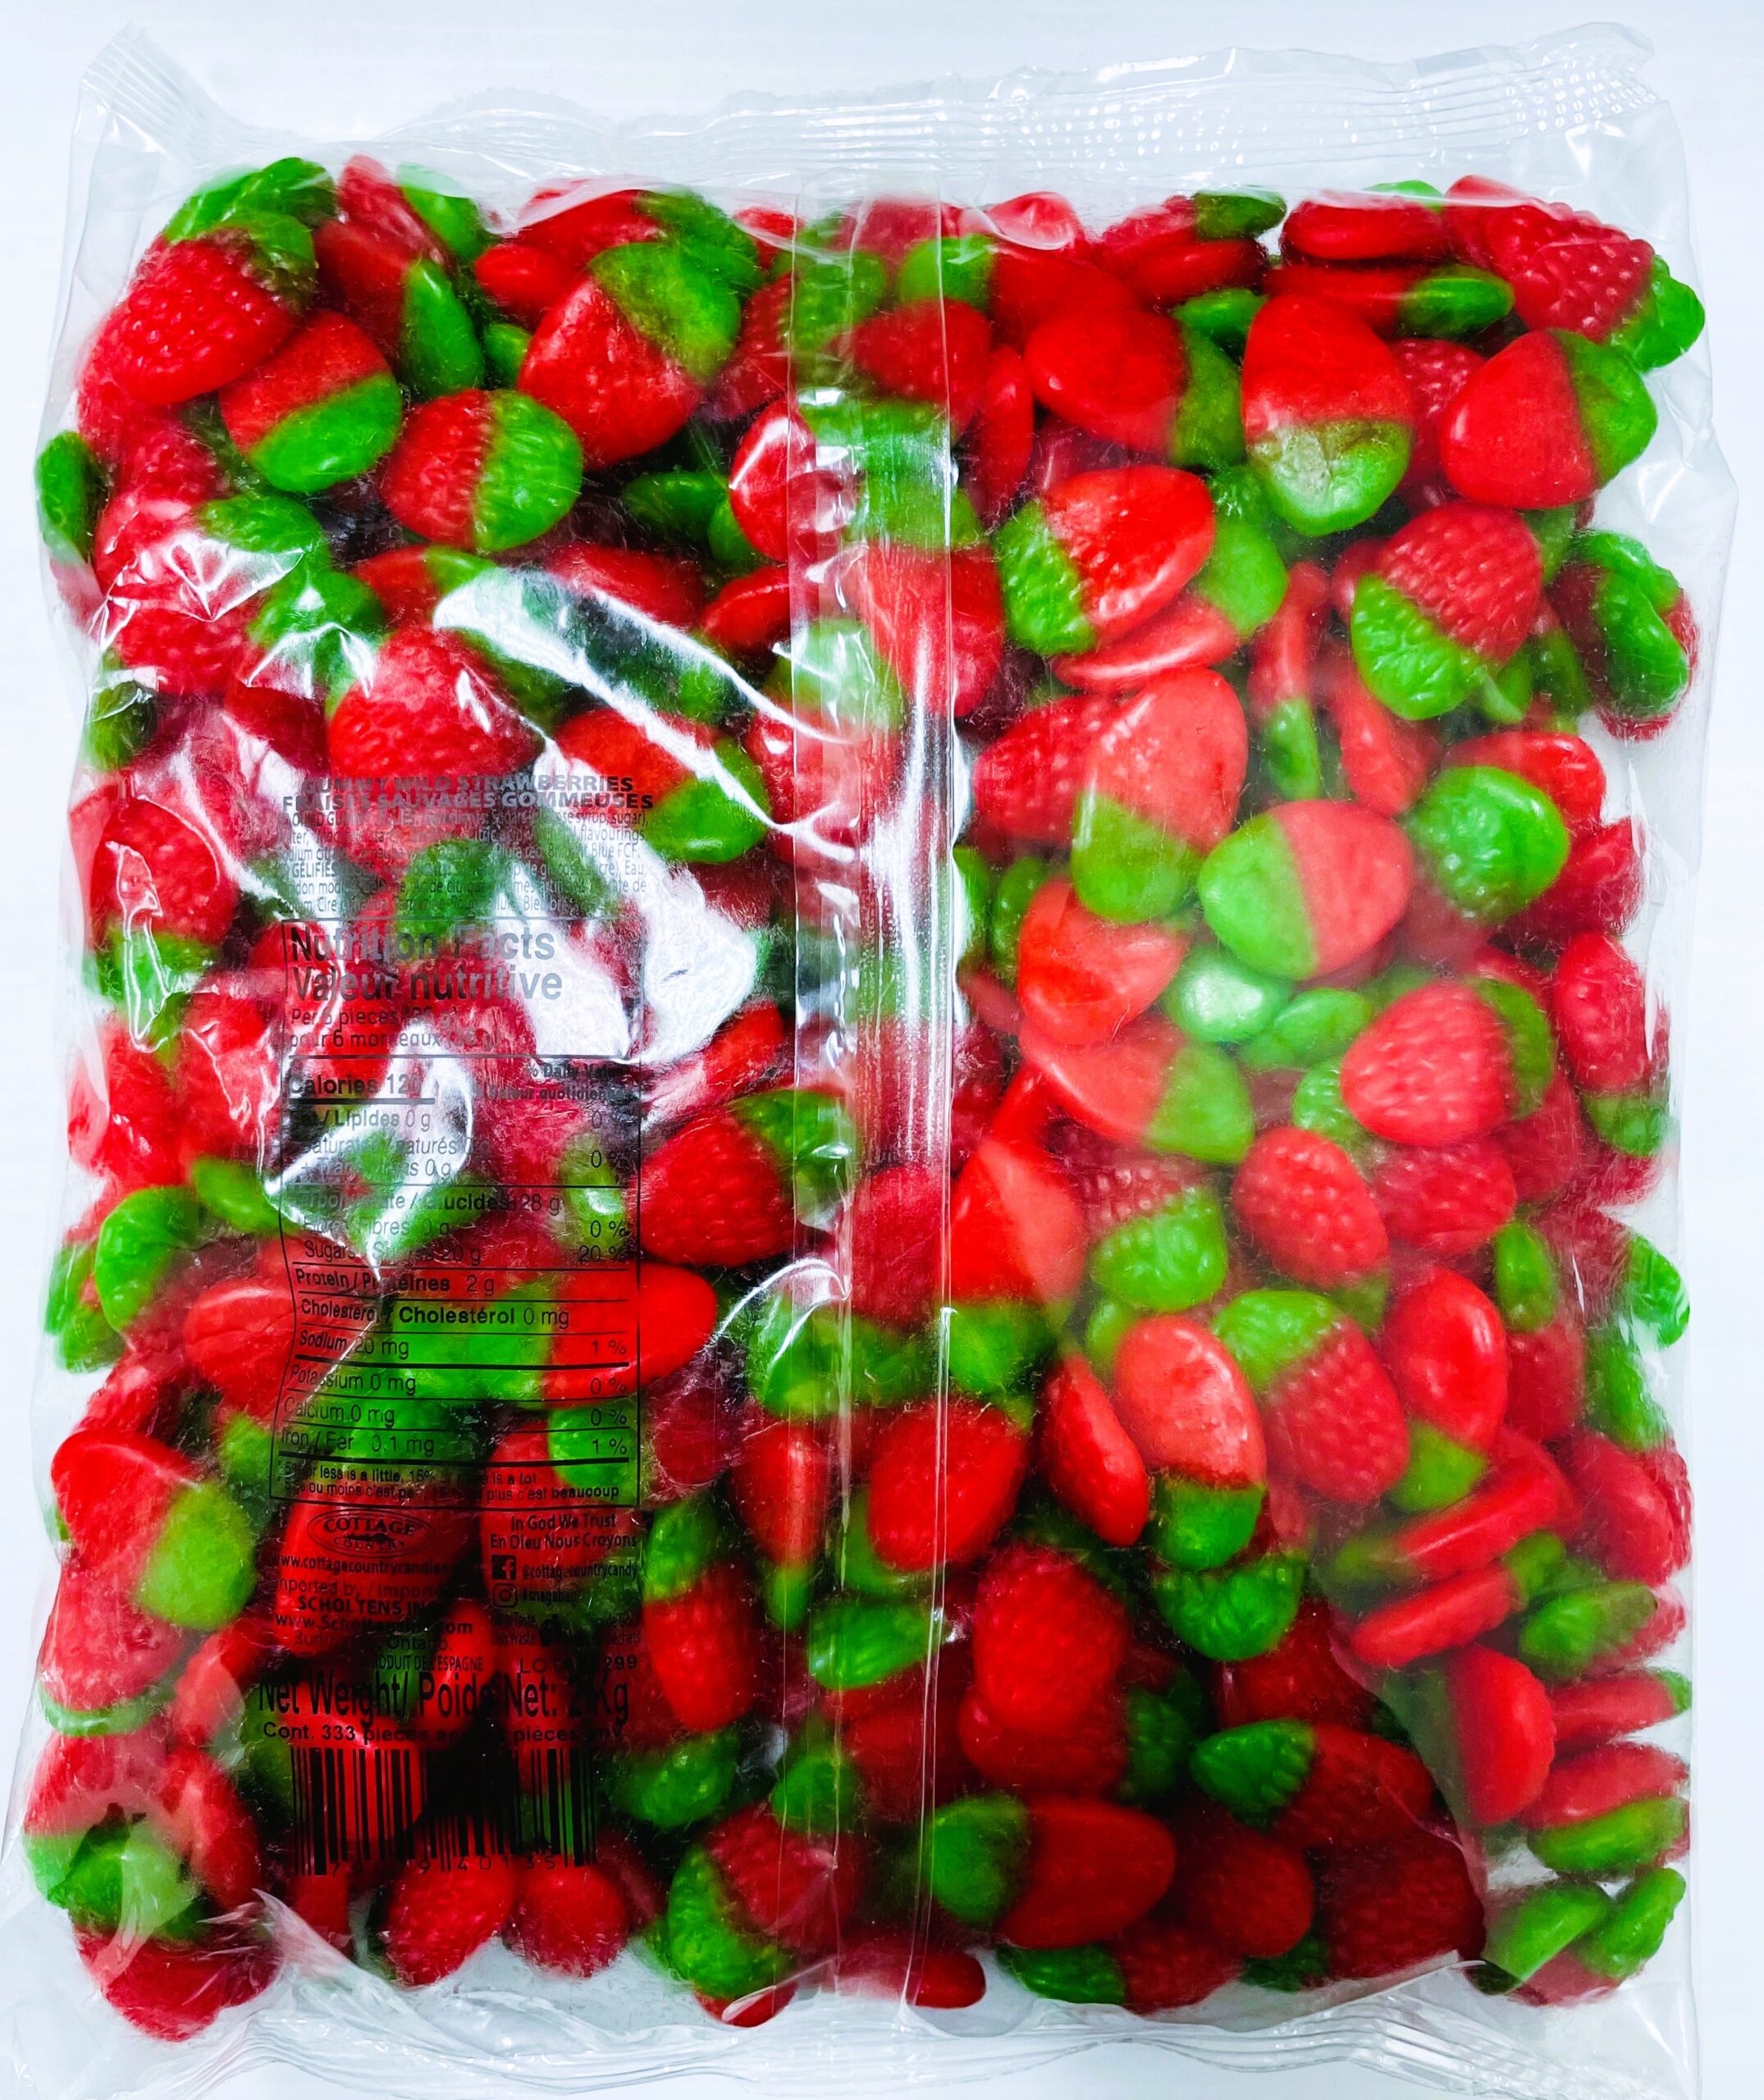 Cinnamon Hearts 200g - Cottage Country Candies